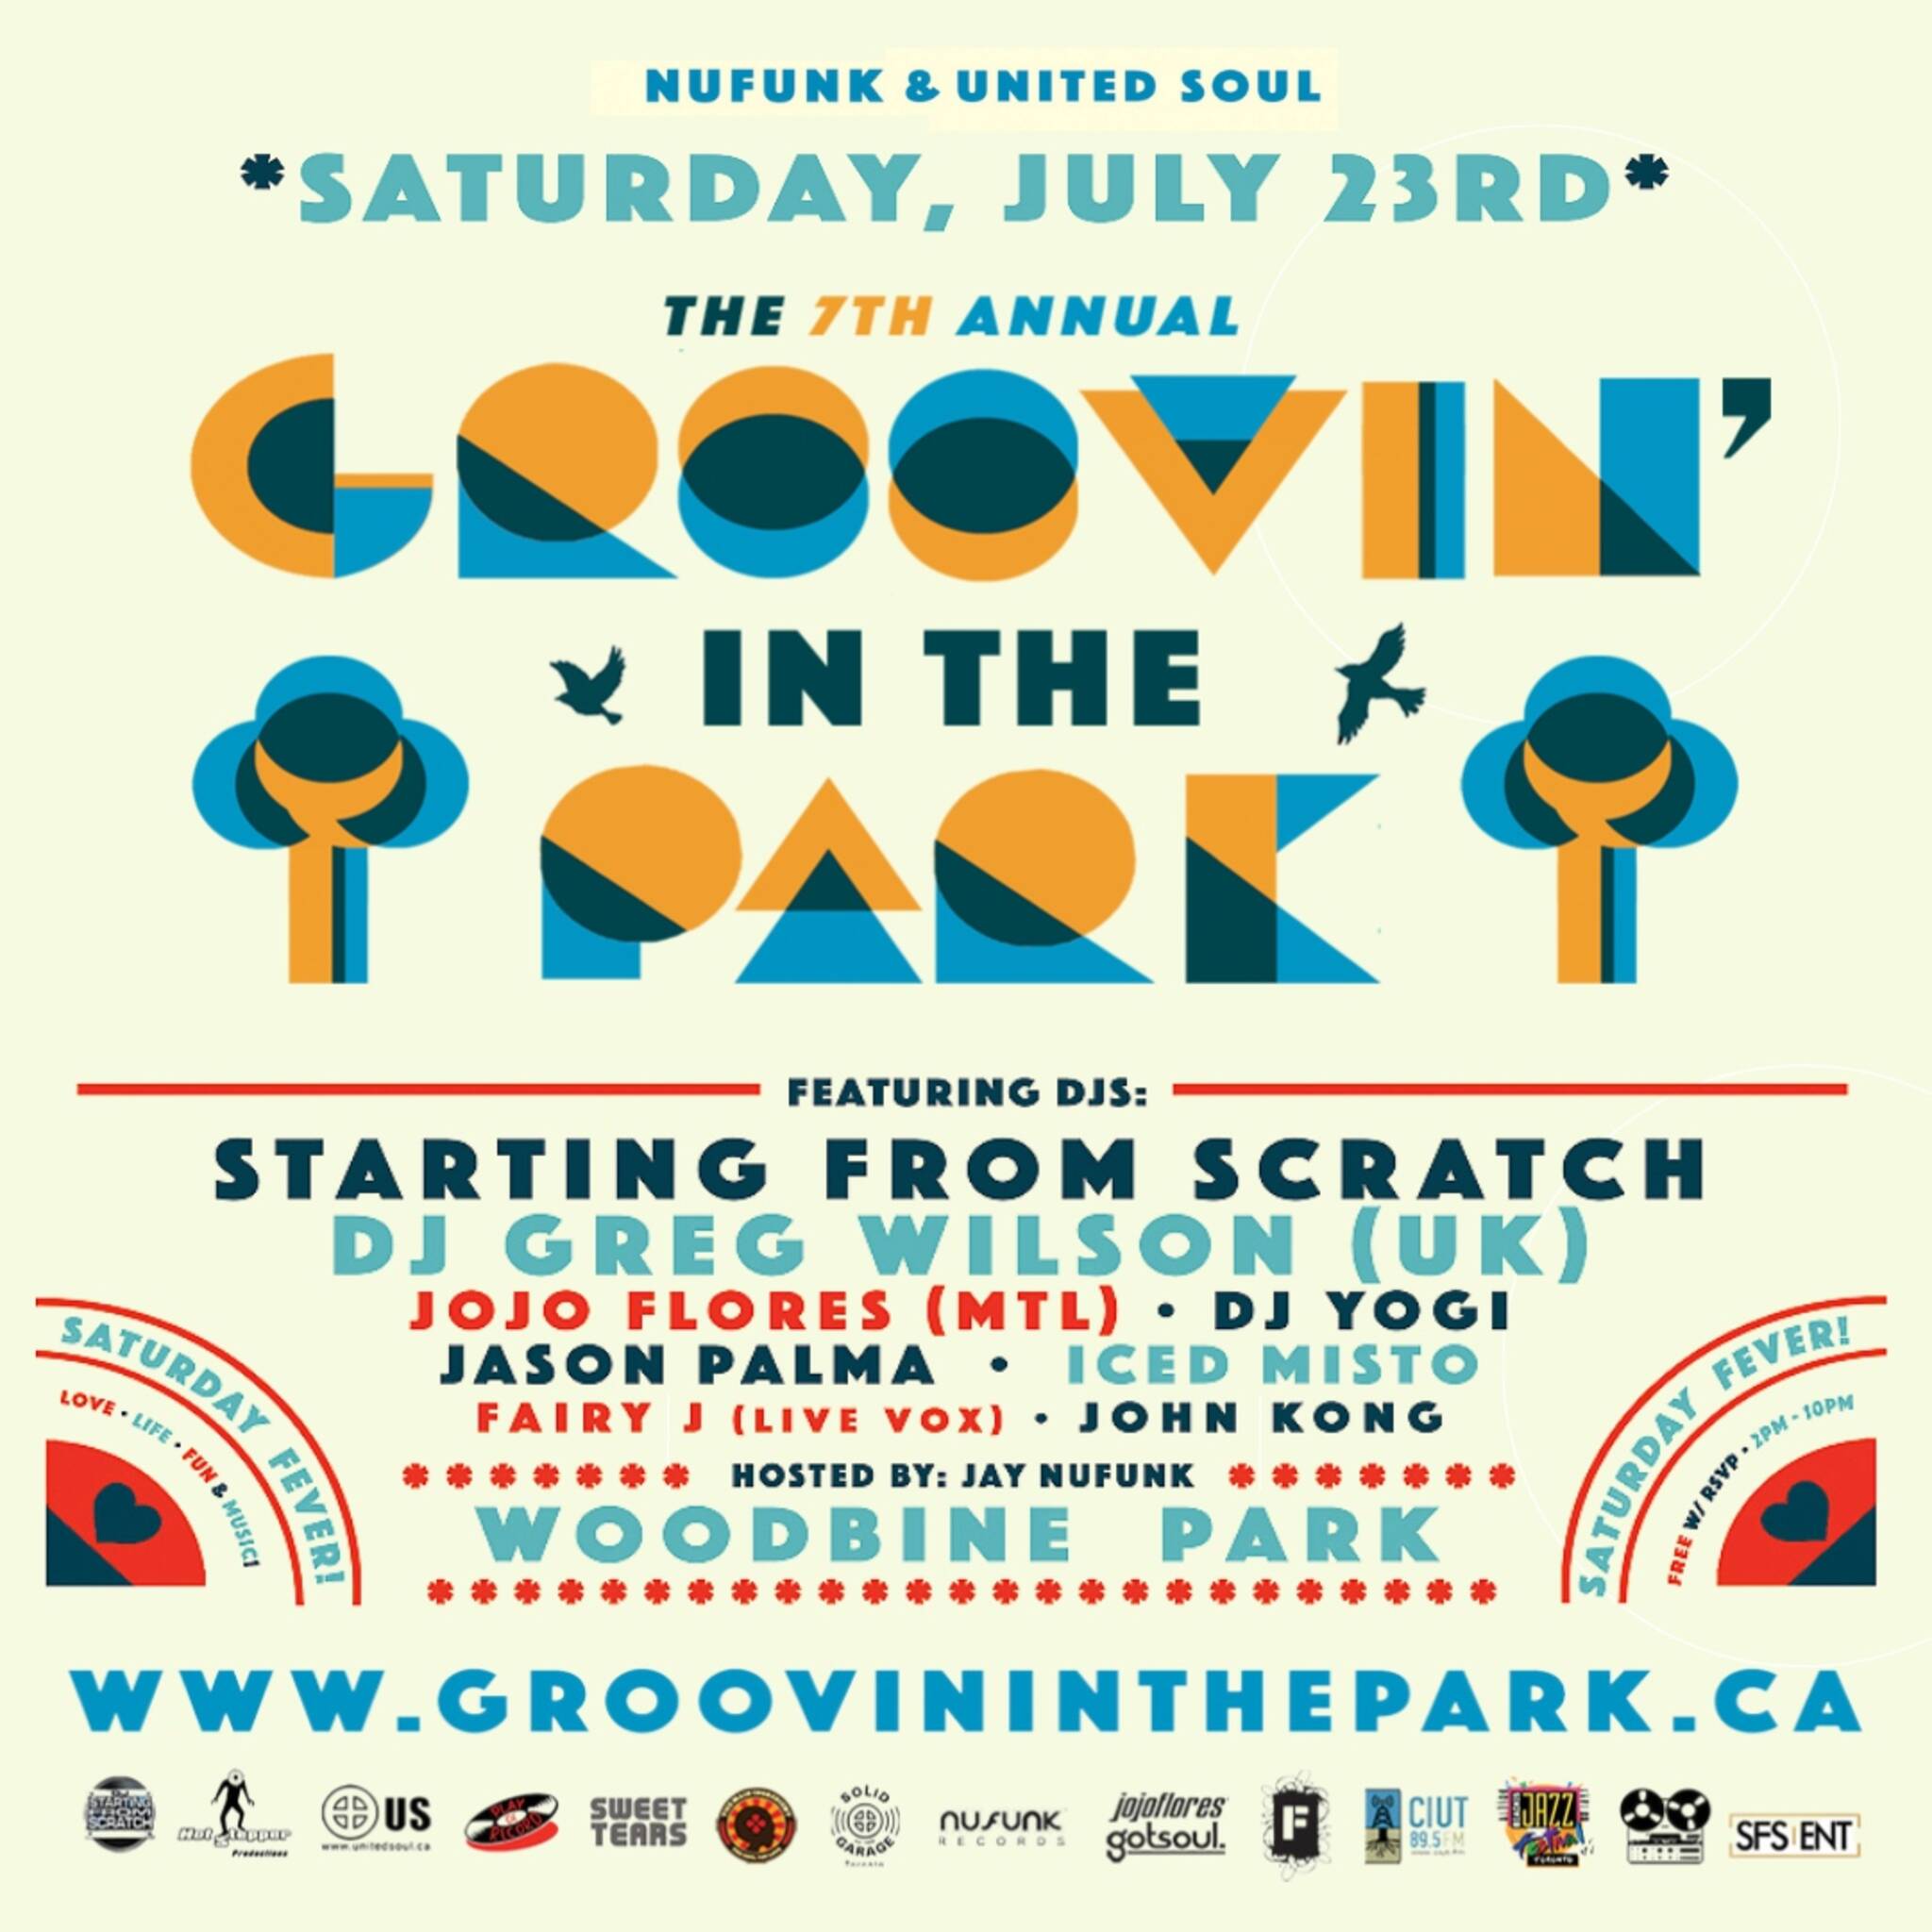 Free Groovin' in the Park Festival